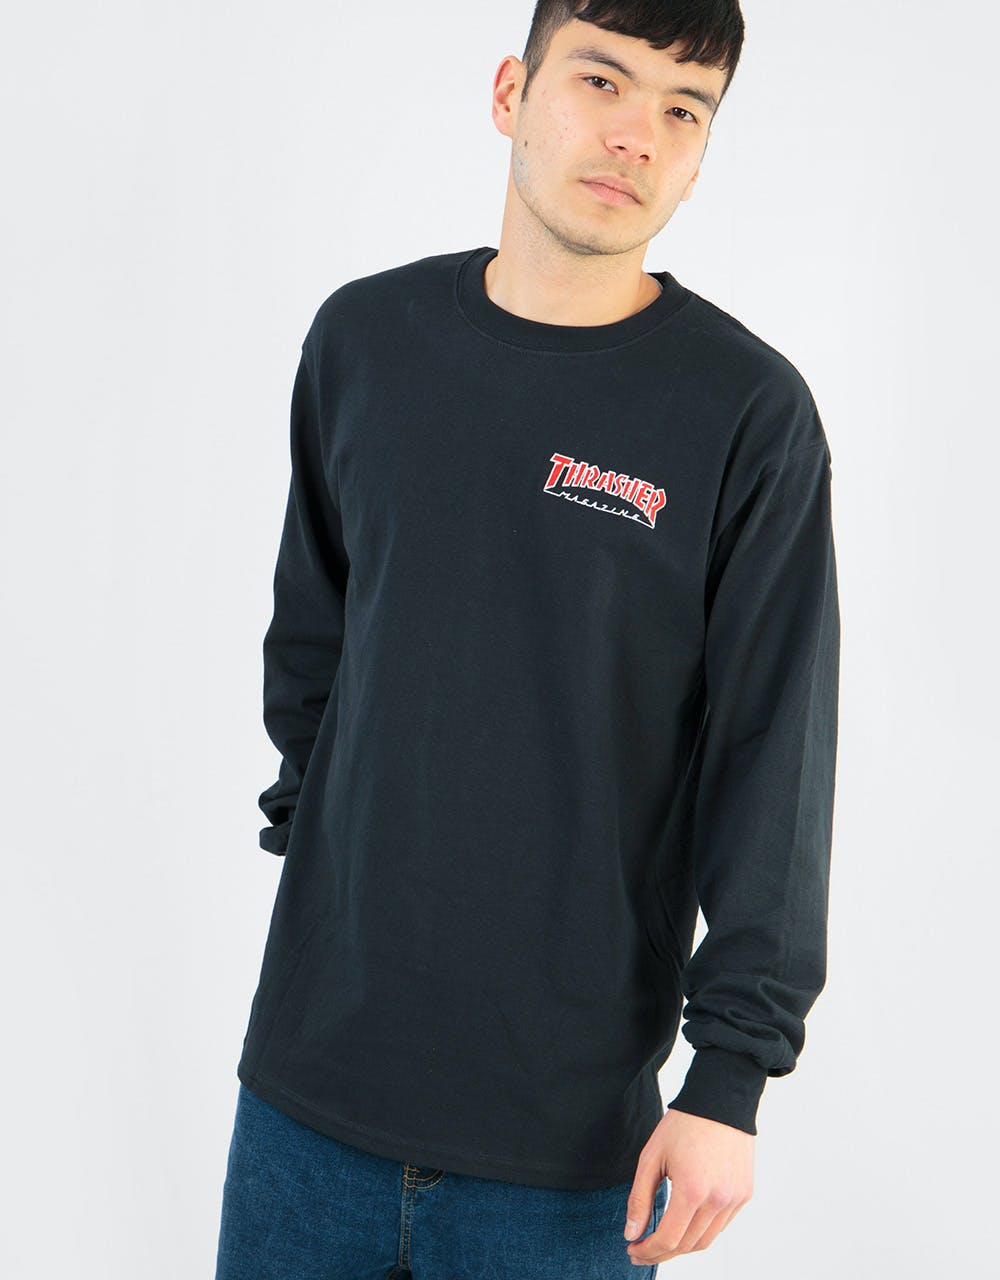 Thrasher Embroidered Outlined L/S T-Shirt - Black